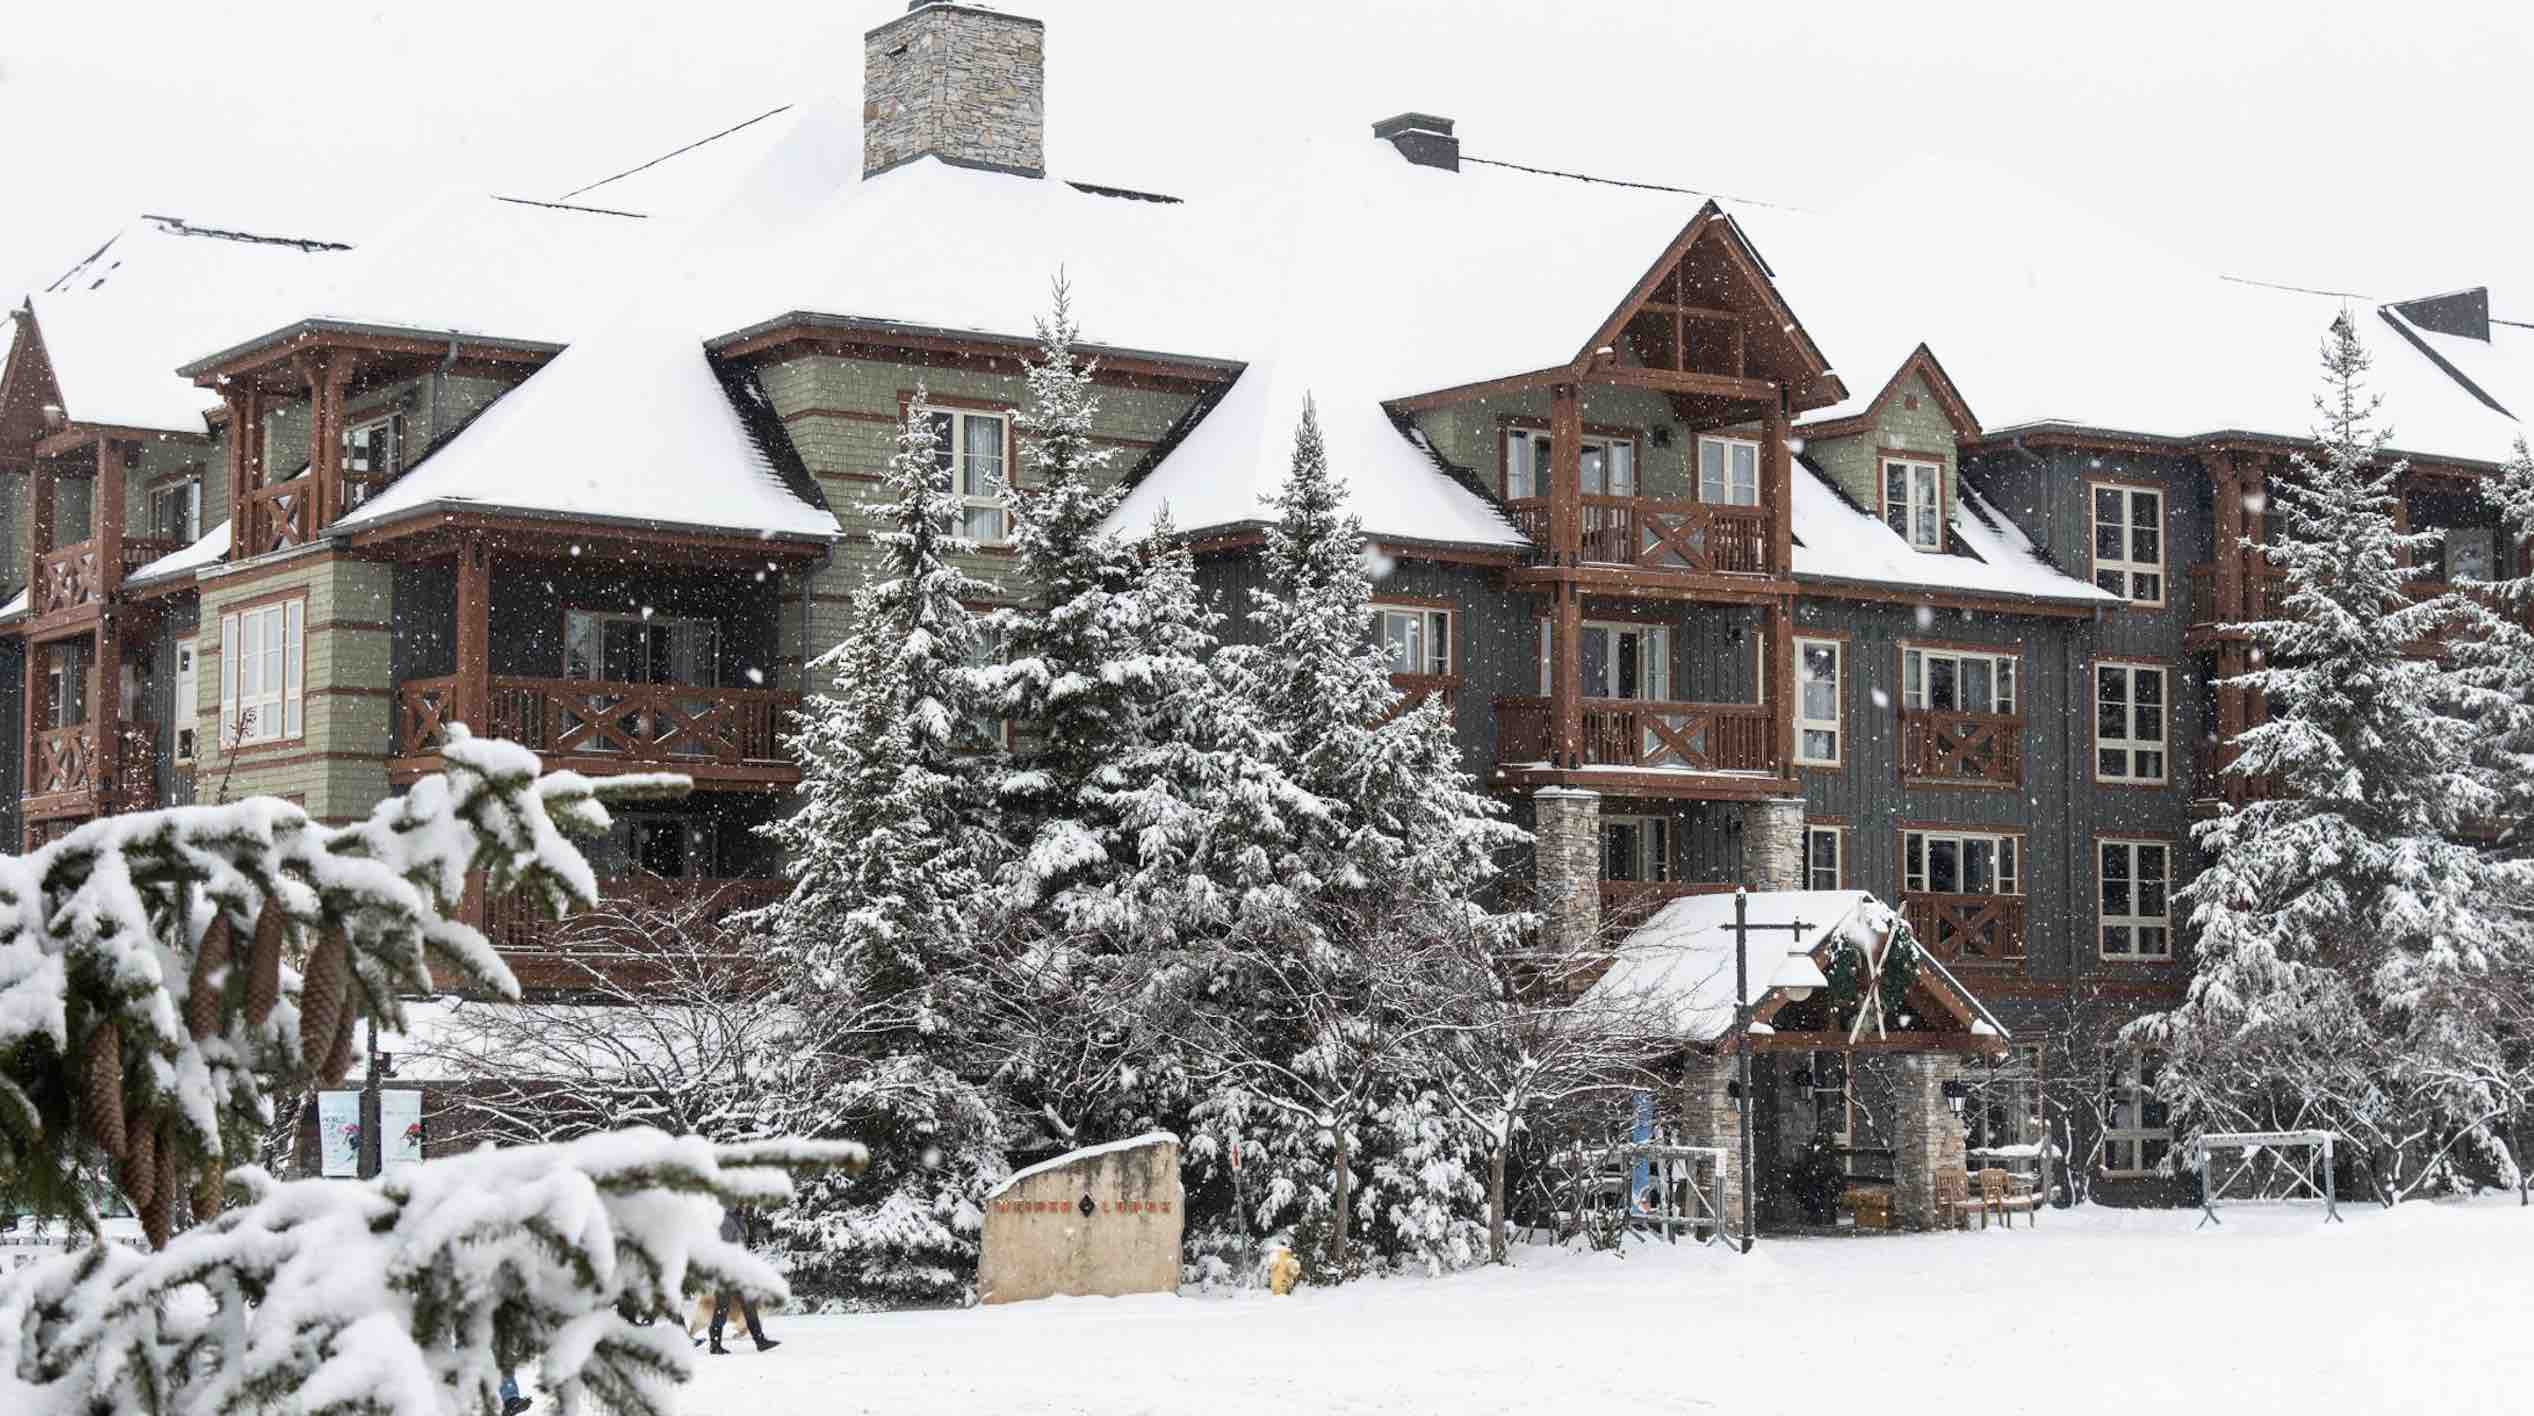 Weider Lodge seen here in winter is one of the top hotels in blue mountains